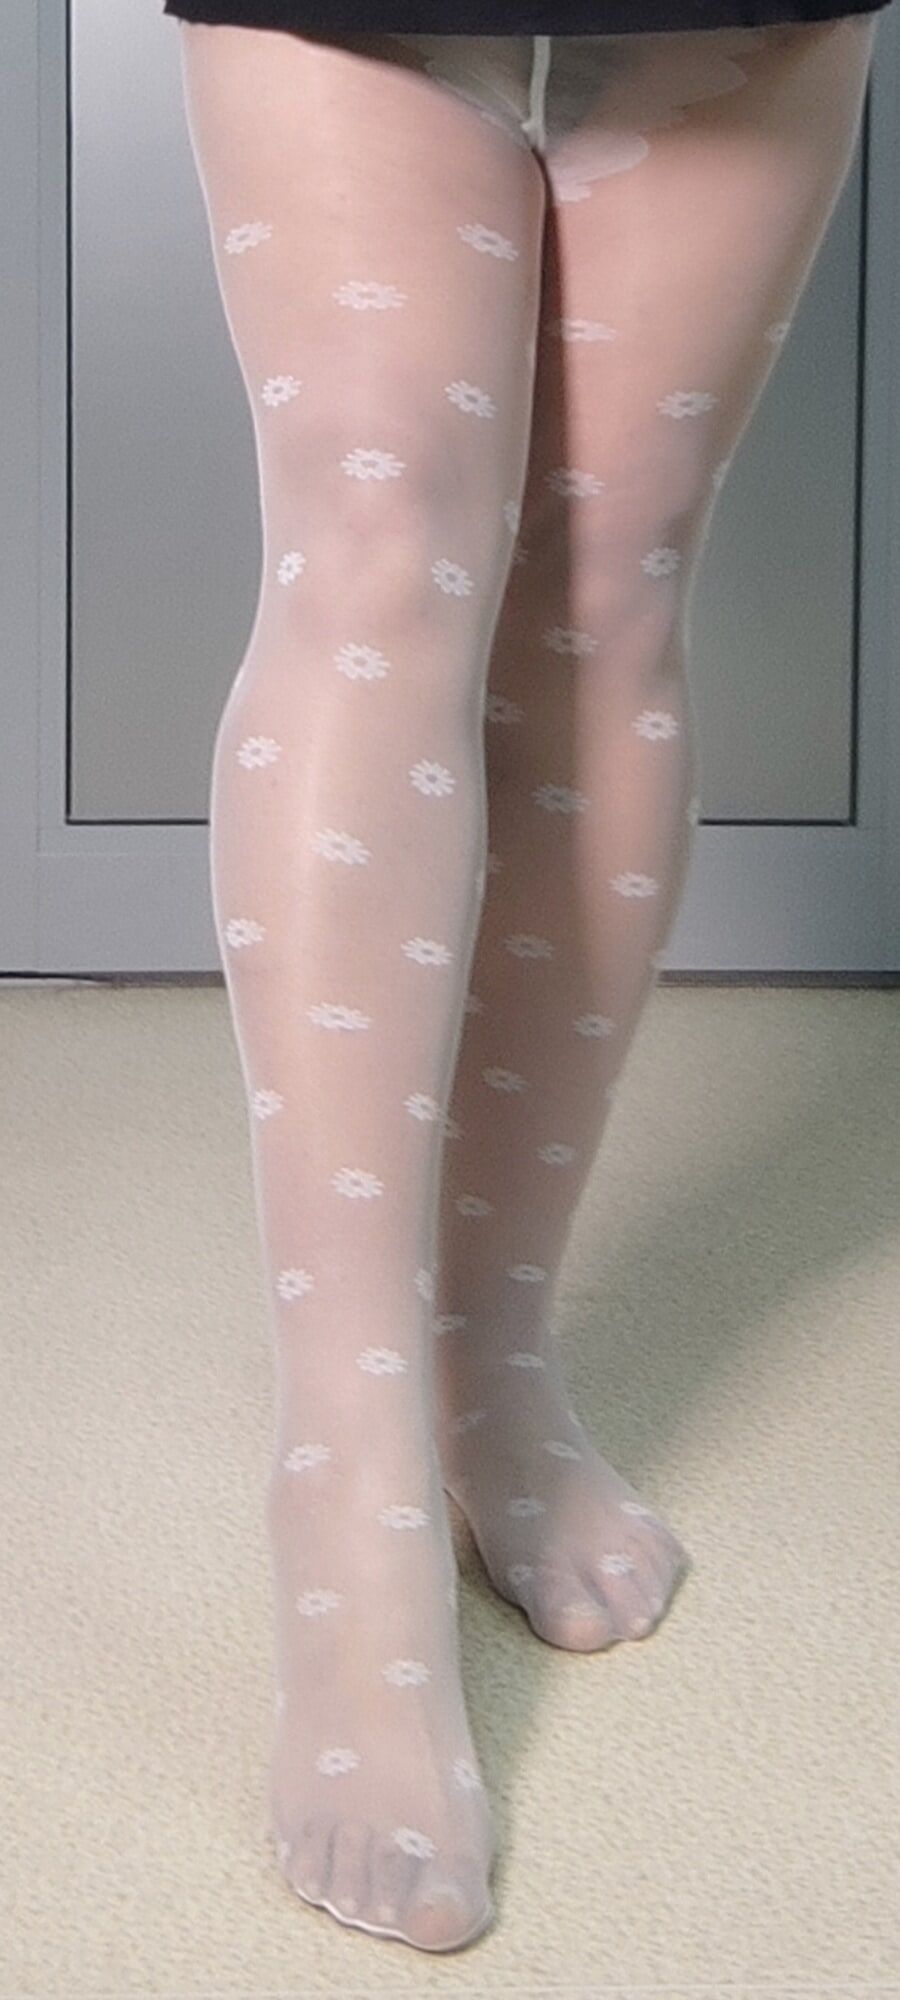 Another pair of white pantyhose on my feet,my favorites. #33